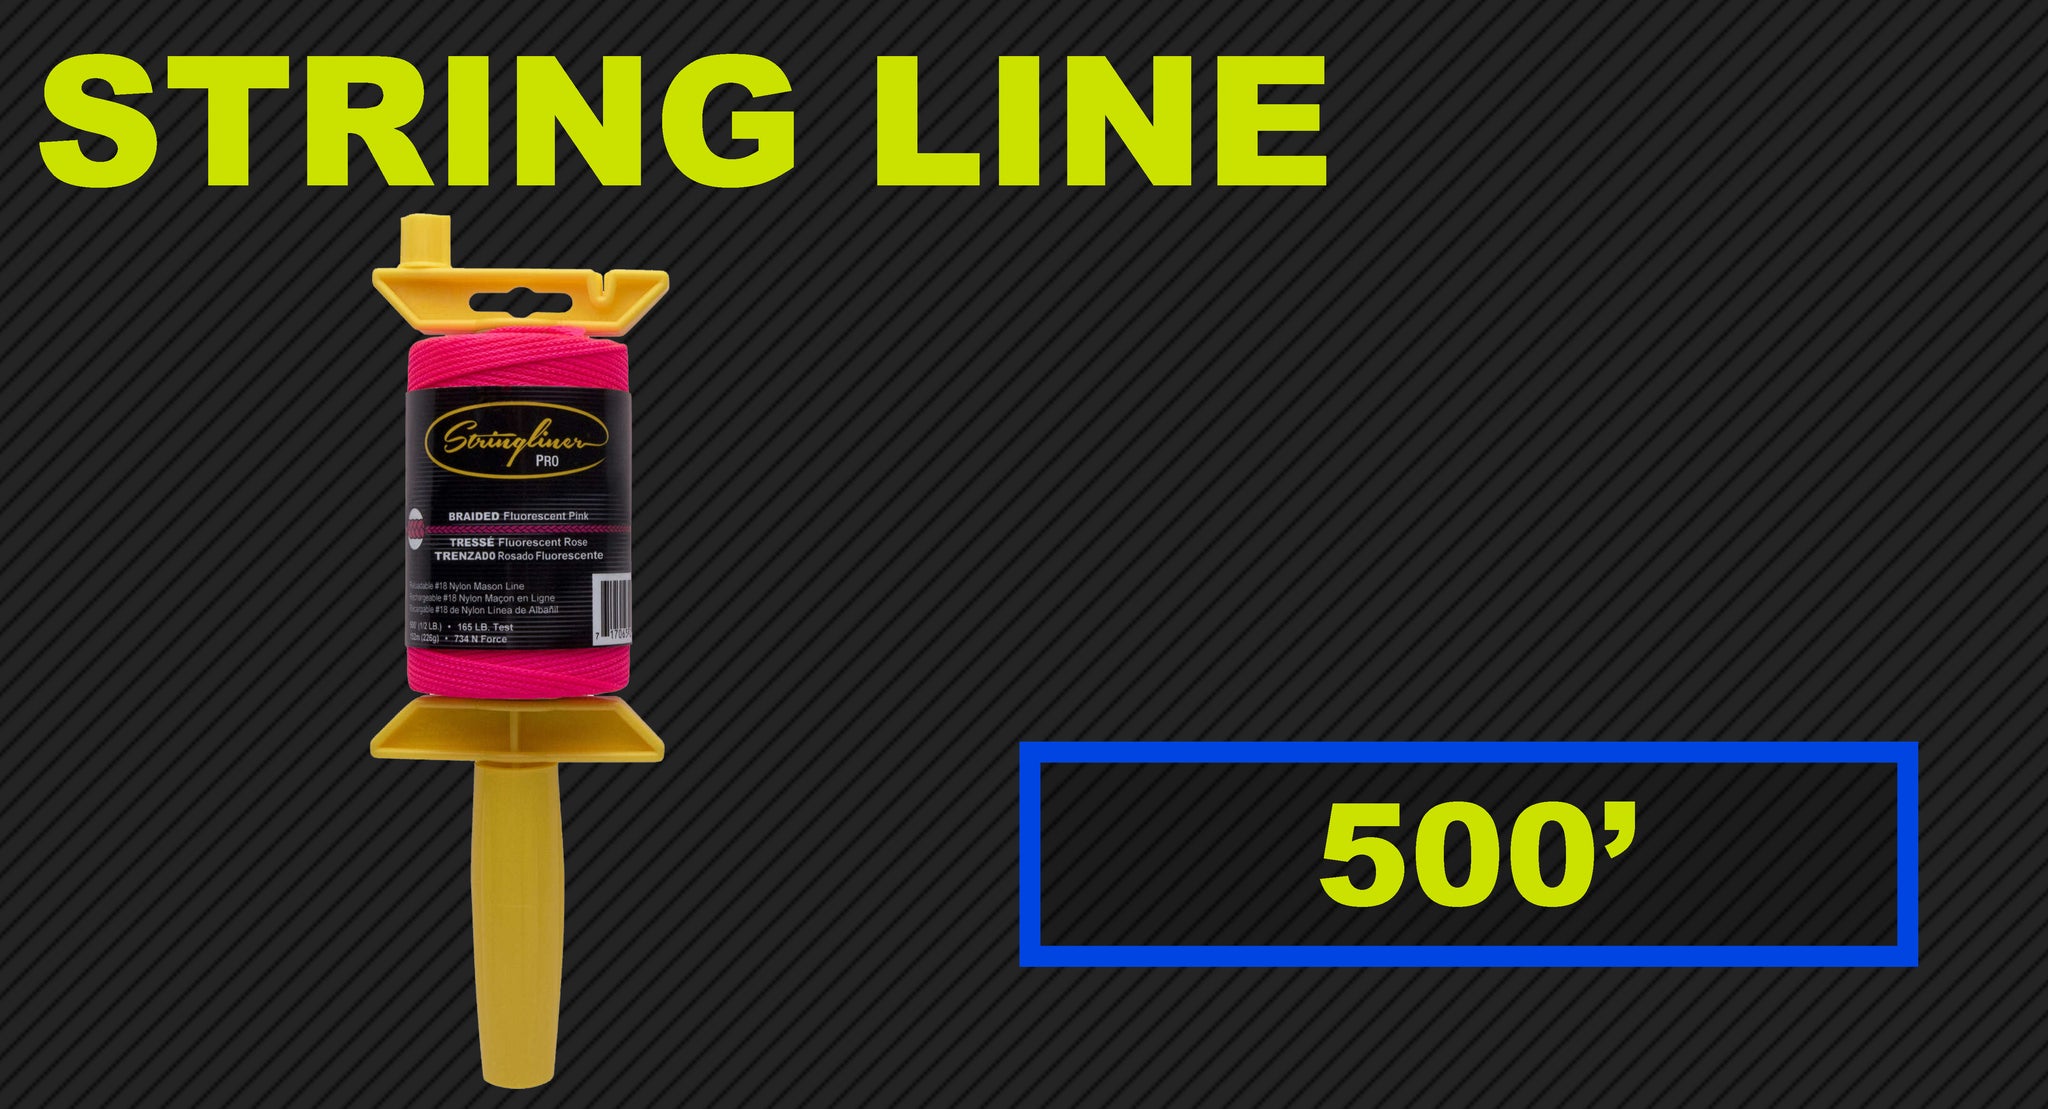 STRING LINE 500' - REBAR CONCRETE PRODUCTS